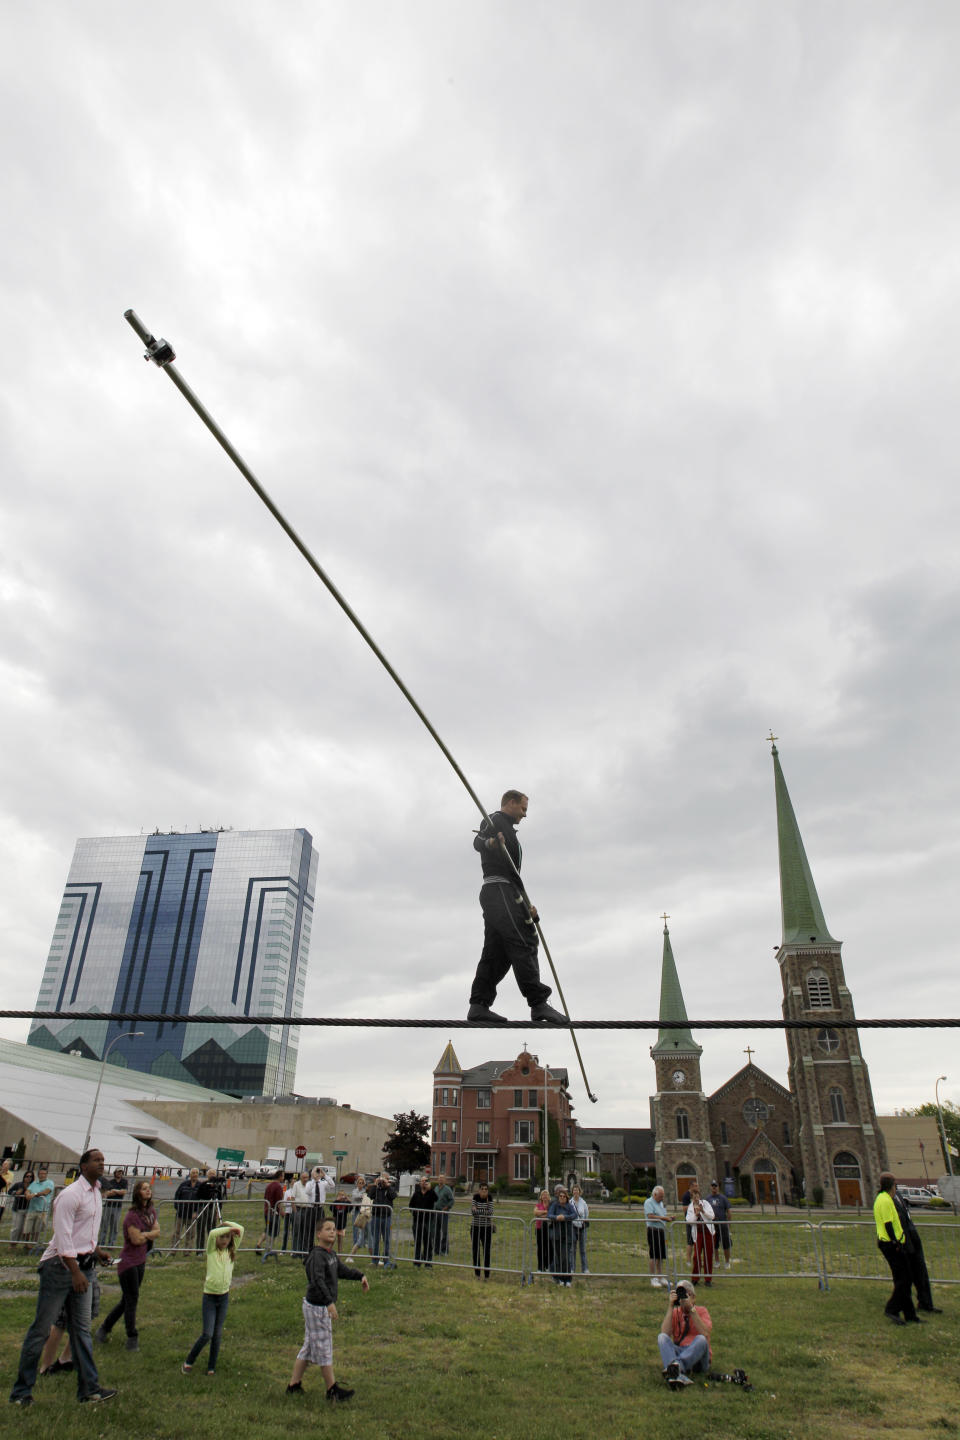 FILE - This May 16, 2012 file photo shows Nik Wallenda performing a walk on a tightrope in the rain during training at the Seneca Niagara Casino for his walk over Niagara Falls in Niagara Falls, N.Y. In recent years, for economic reasons, Niagara Falls has thrown open its doors to casino gambling, gay weddings and a tightrope walk that, until laws were relaxed, would have meant arrest. It even briefly considered taking in toxic wastewater from hydraulic fracturing. On the drawing board now is a plan to entice young people to move in by paying down their student loans. (AP Photo/David Duprey, File)